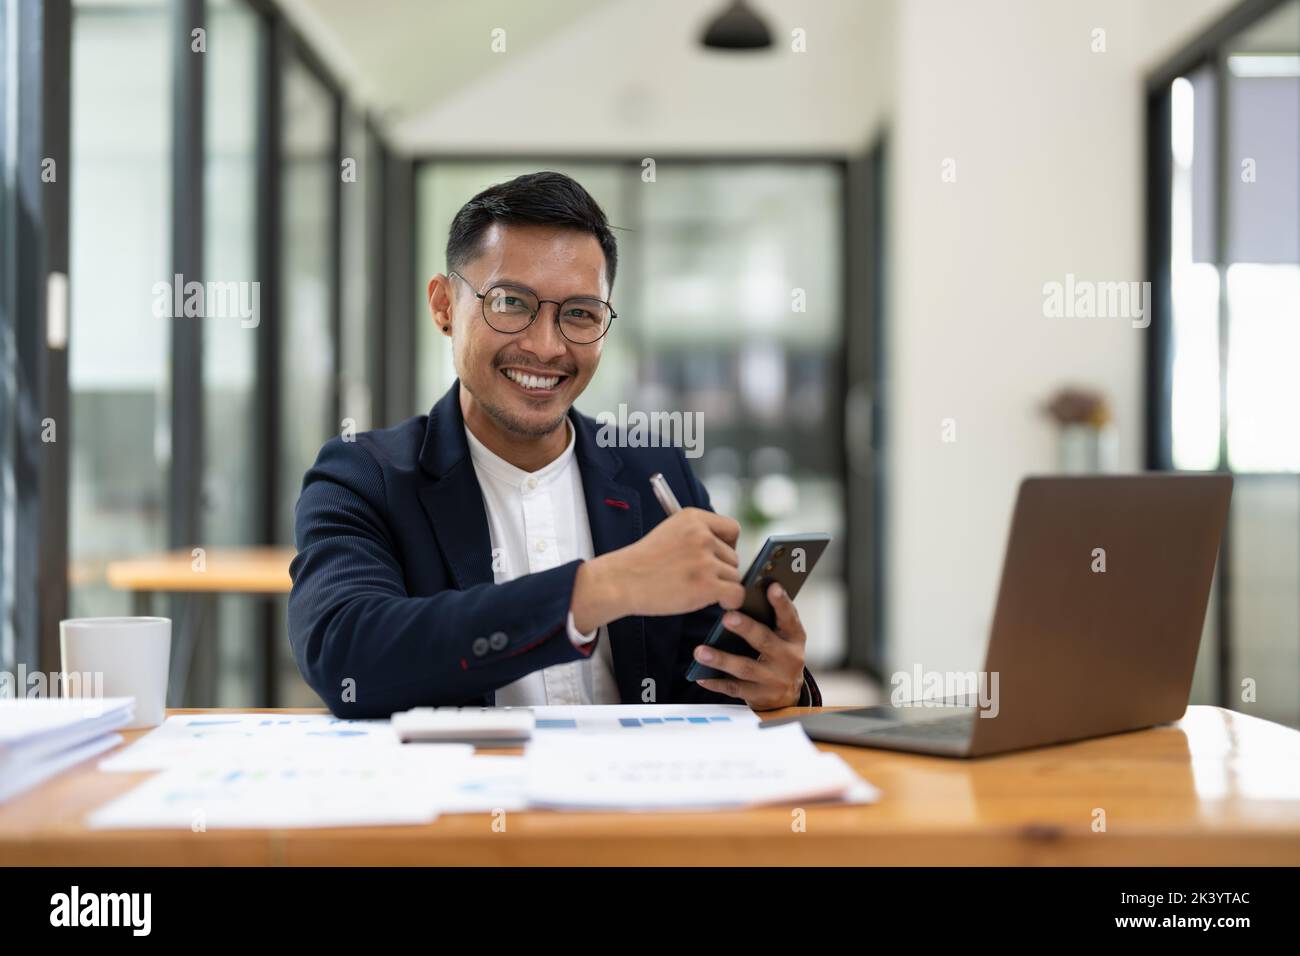 Portrait of a business man using mobile phone. asian business men working with laptop at office. Stock Photo